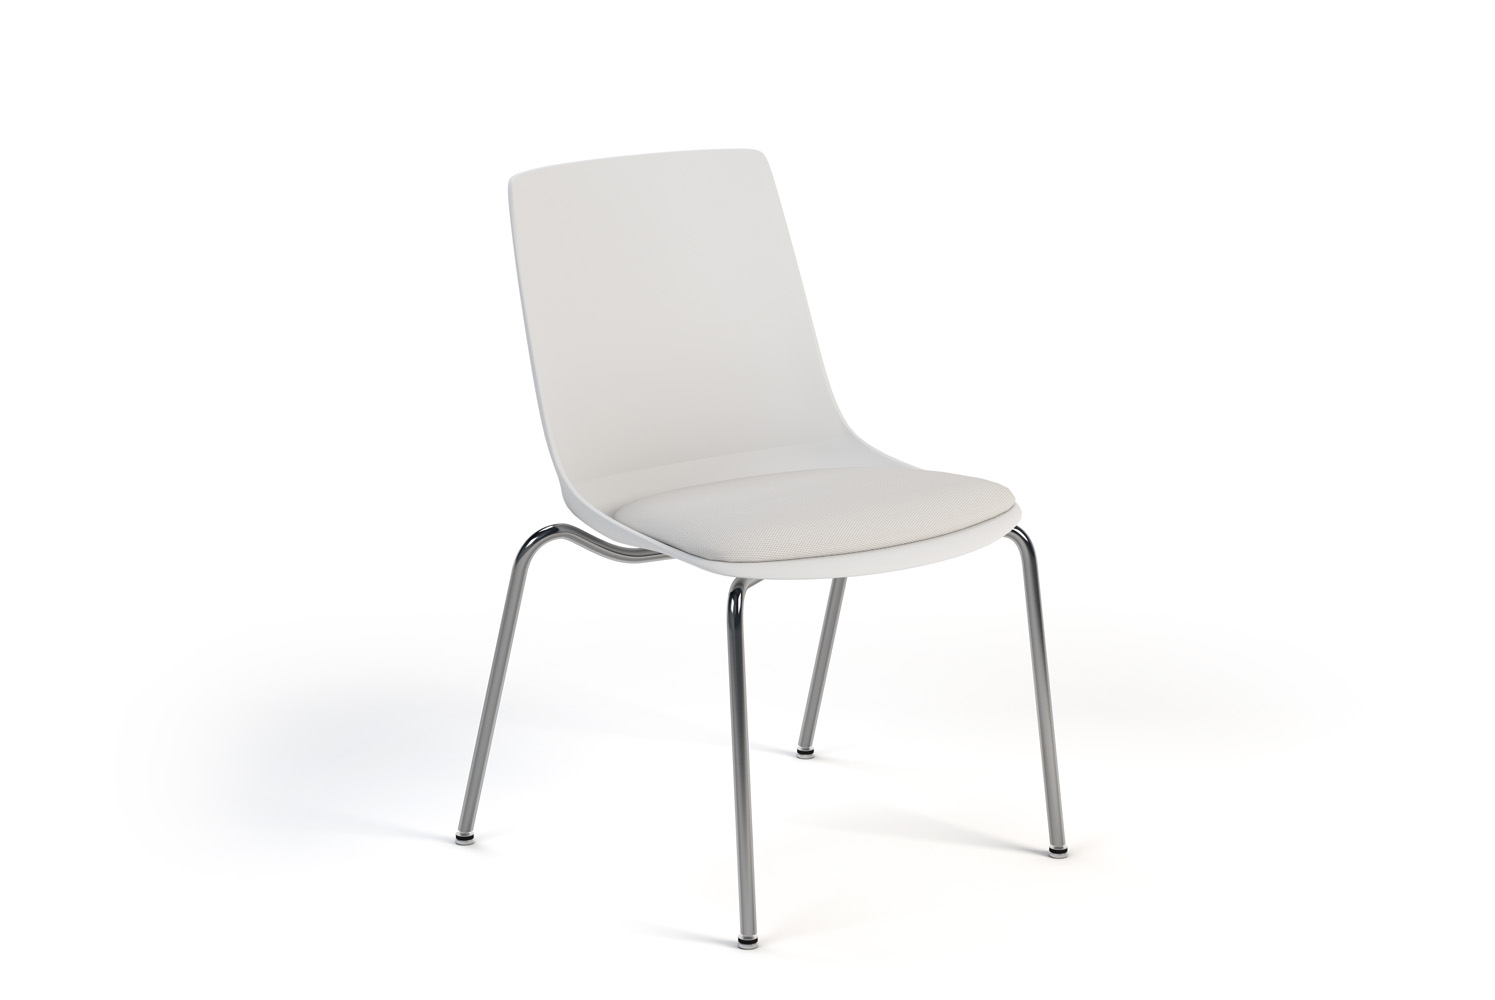 Kayden Junior Chair with Upholstered Seat Insert